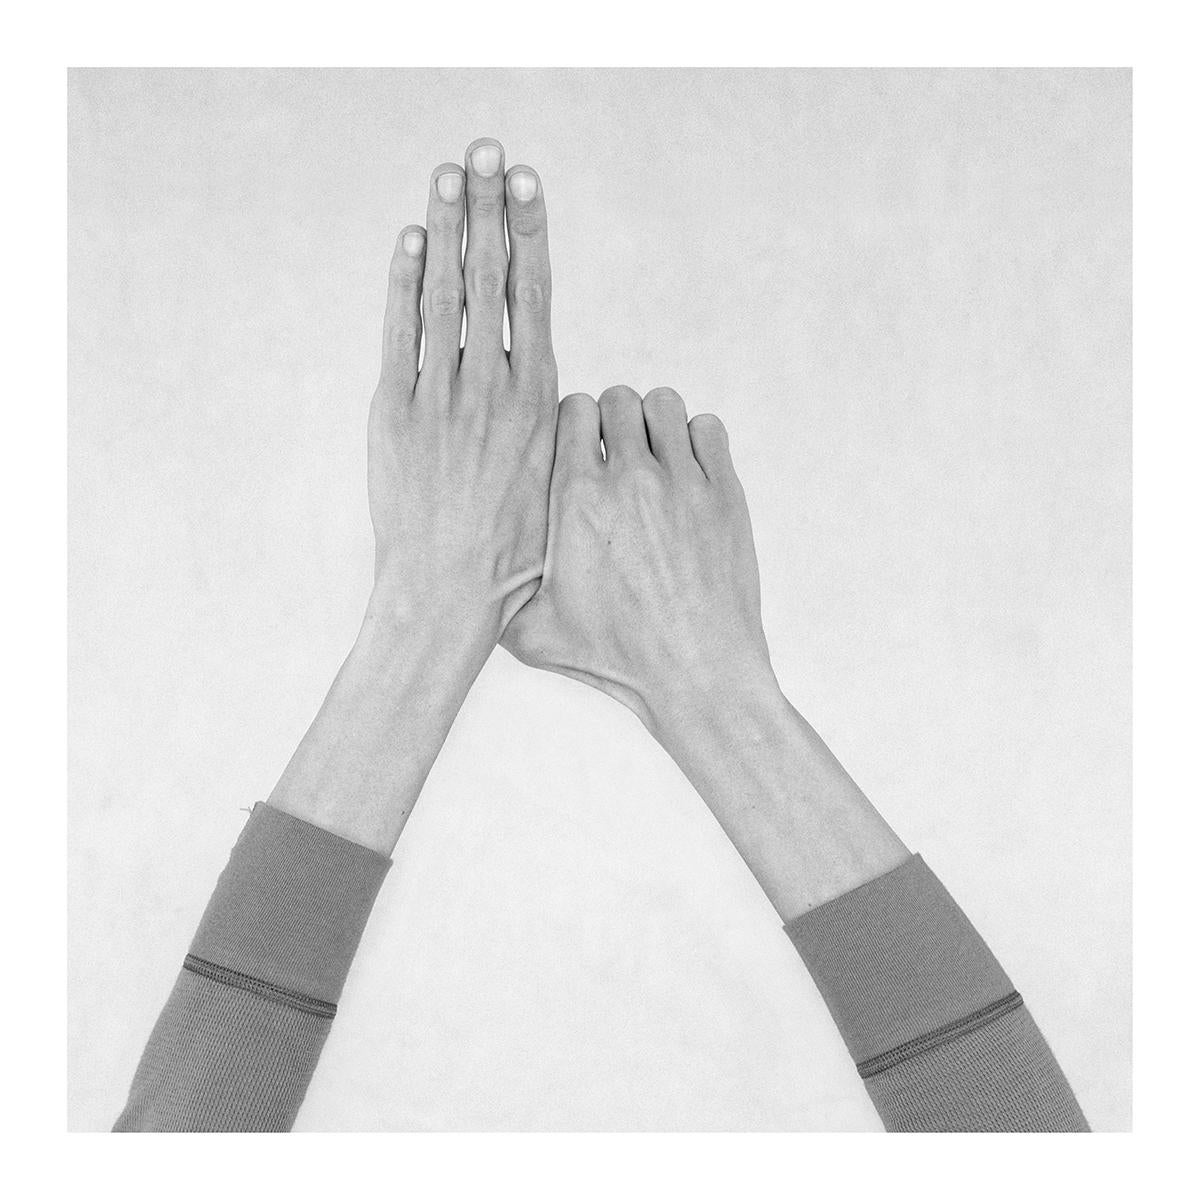 Nico Baixas / Gos-com-fuig Black and White Photograph - Untitled XXXVIII From the Series Chiromorphose. Hands. Black & White Photography